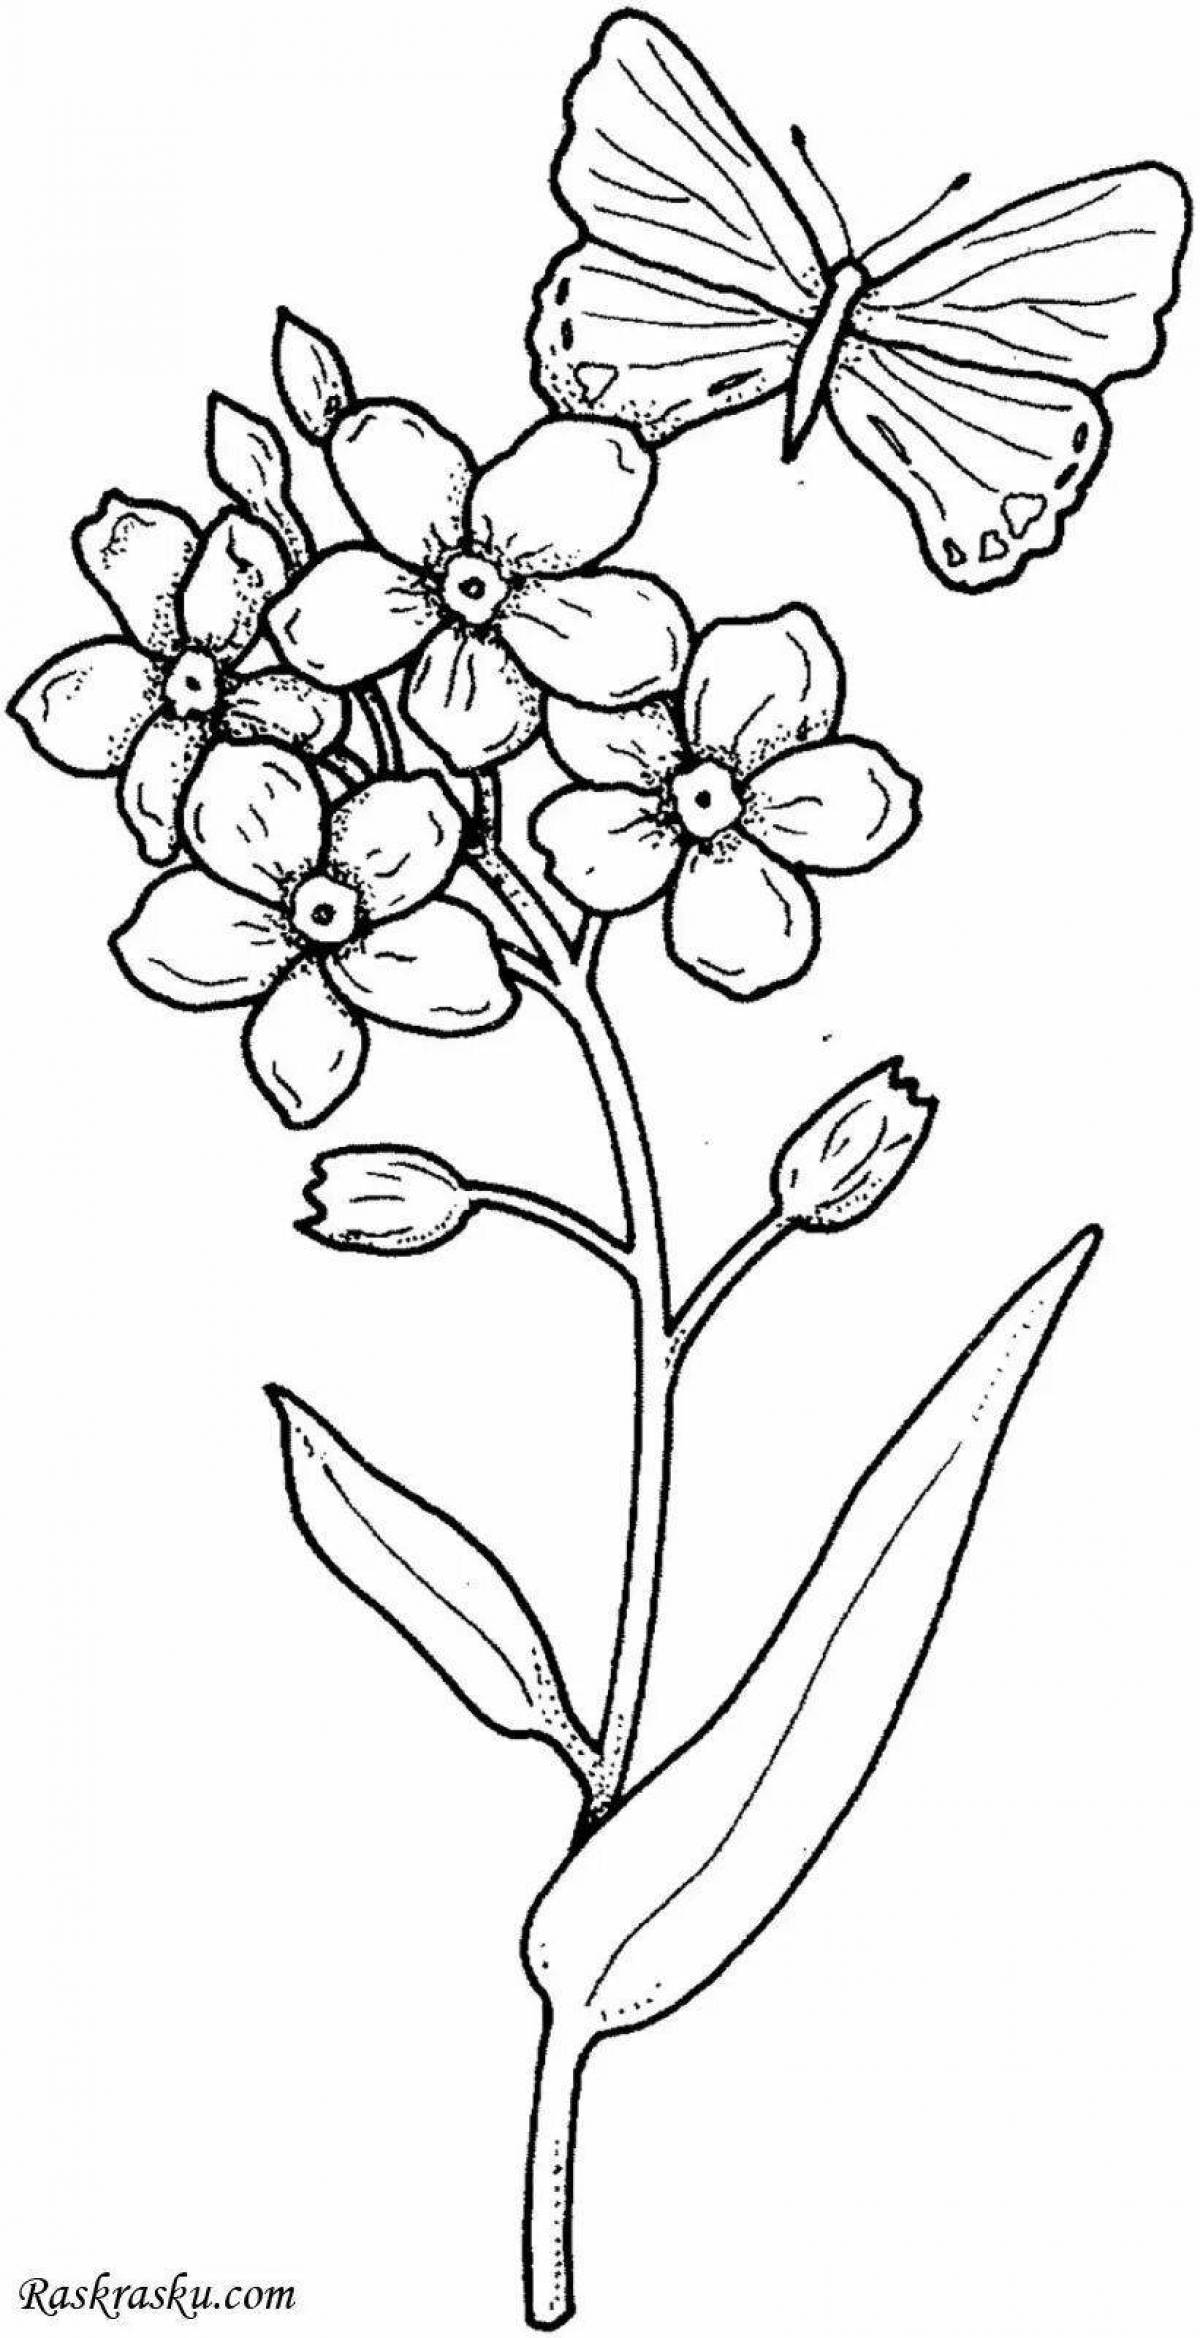 Coloring page charming forget-me-not